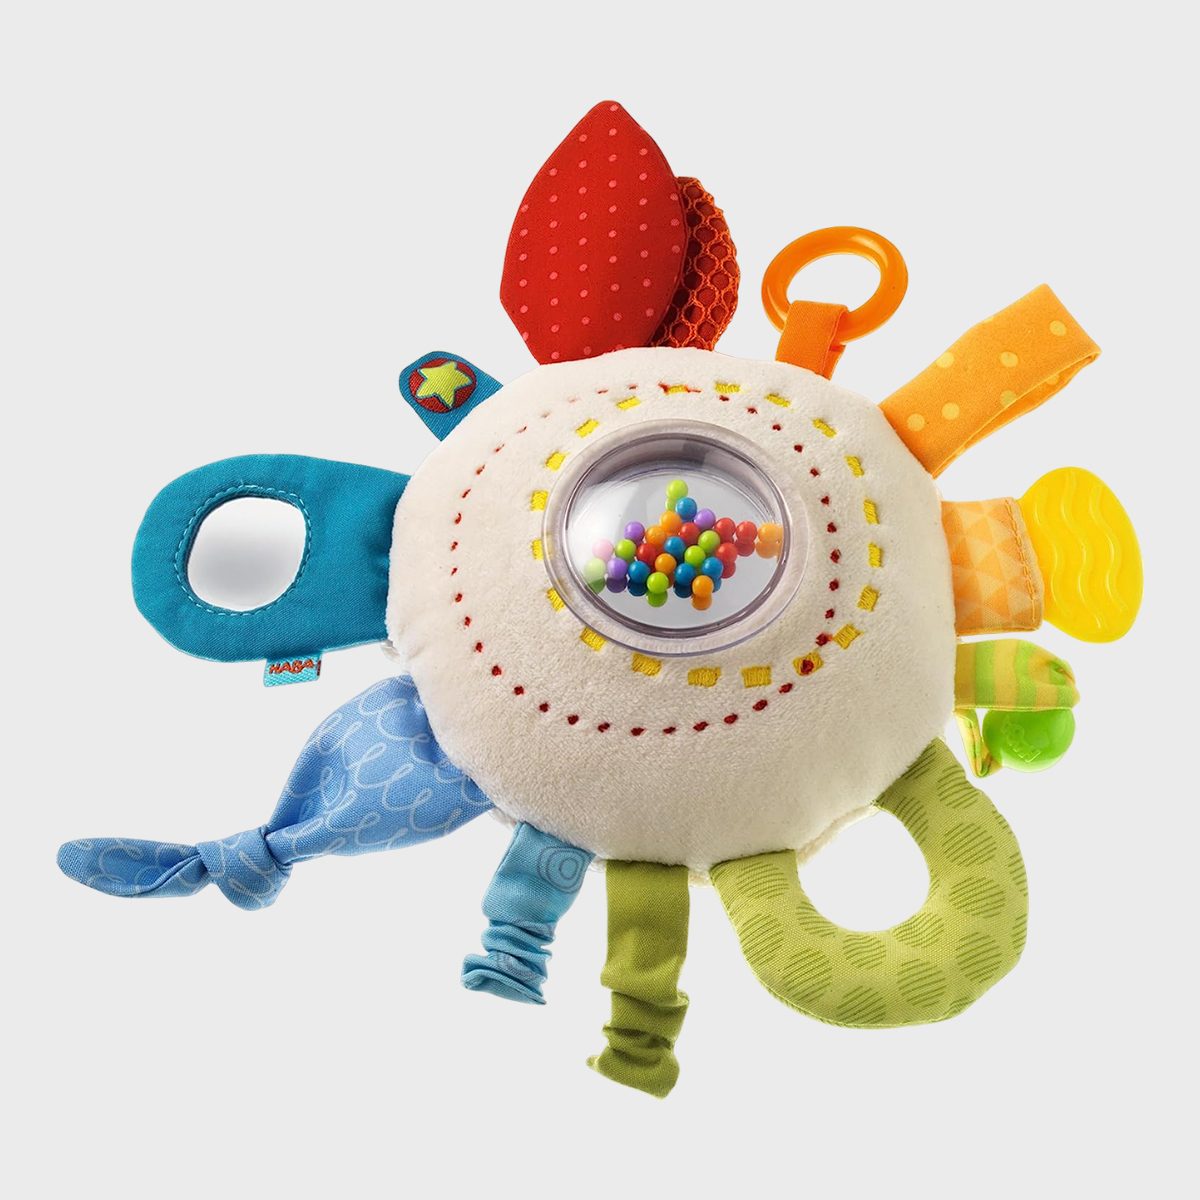 <p>From textures and tags to crinkles and rattles, this <a href="https://www.amazon.com/HABA-Teether-Cuddly-Rainbow-Round/dp/B0169SG5Z0" rel="noopener noreferrer">busy toy</a> has all the things babies love. In addition to the colorful tabs and tags, they'll also love the soft, plush texture. And since it's bound to end up in the baby's mouth, parents will appreciate the fact that this toy is machine-washable. Just toss it in the delicate cycle with one of these <a href="https://www.rd.com/article/safest-laundry-detergents/" rel="noopener noreferrer">safe laundry detergents</a> and lay it flat to dry.</p> <p class="listicle-page__cta-button-shop"><a class="shop-btn" href="https://www.amazon.com/HABA-Teether-Cuddly-Rainbow-Round/dp/B0169SG5Z0">Shop Now</a></p>